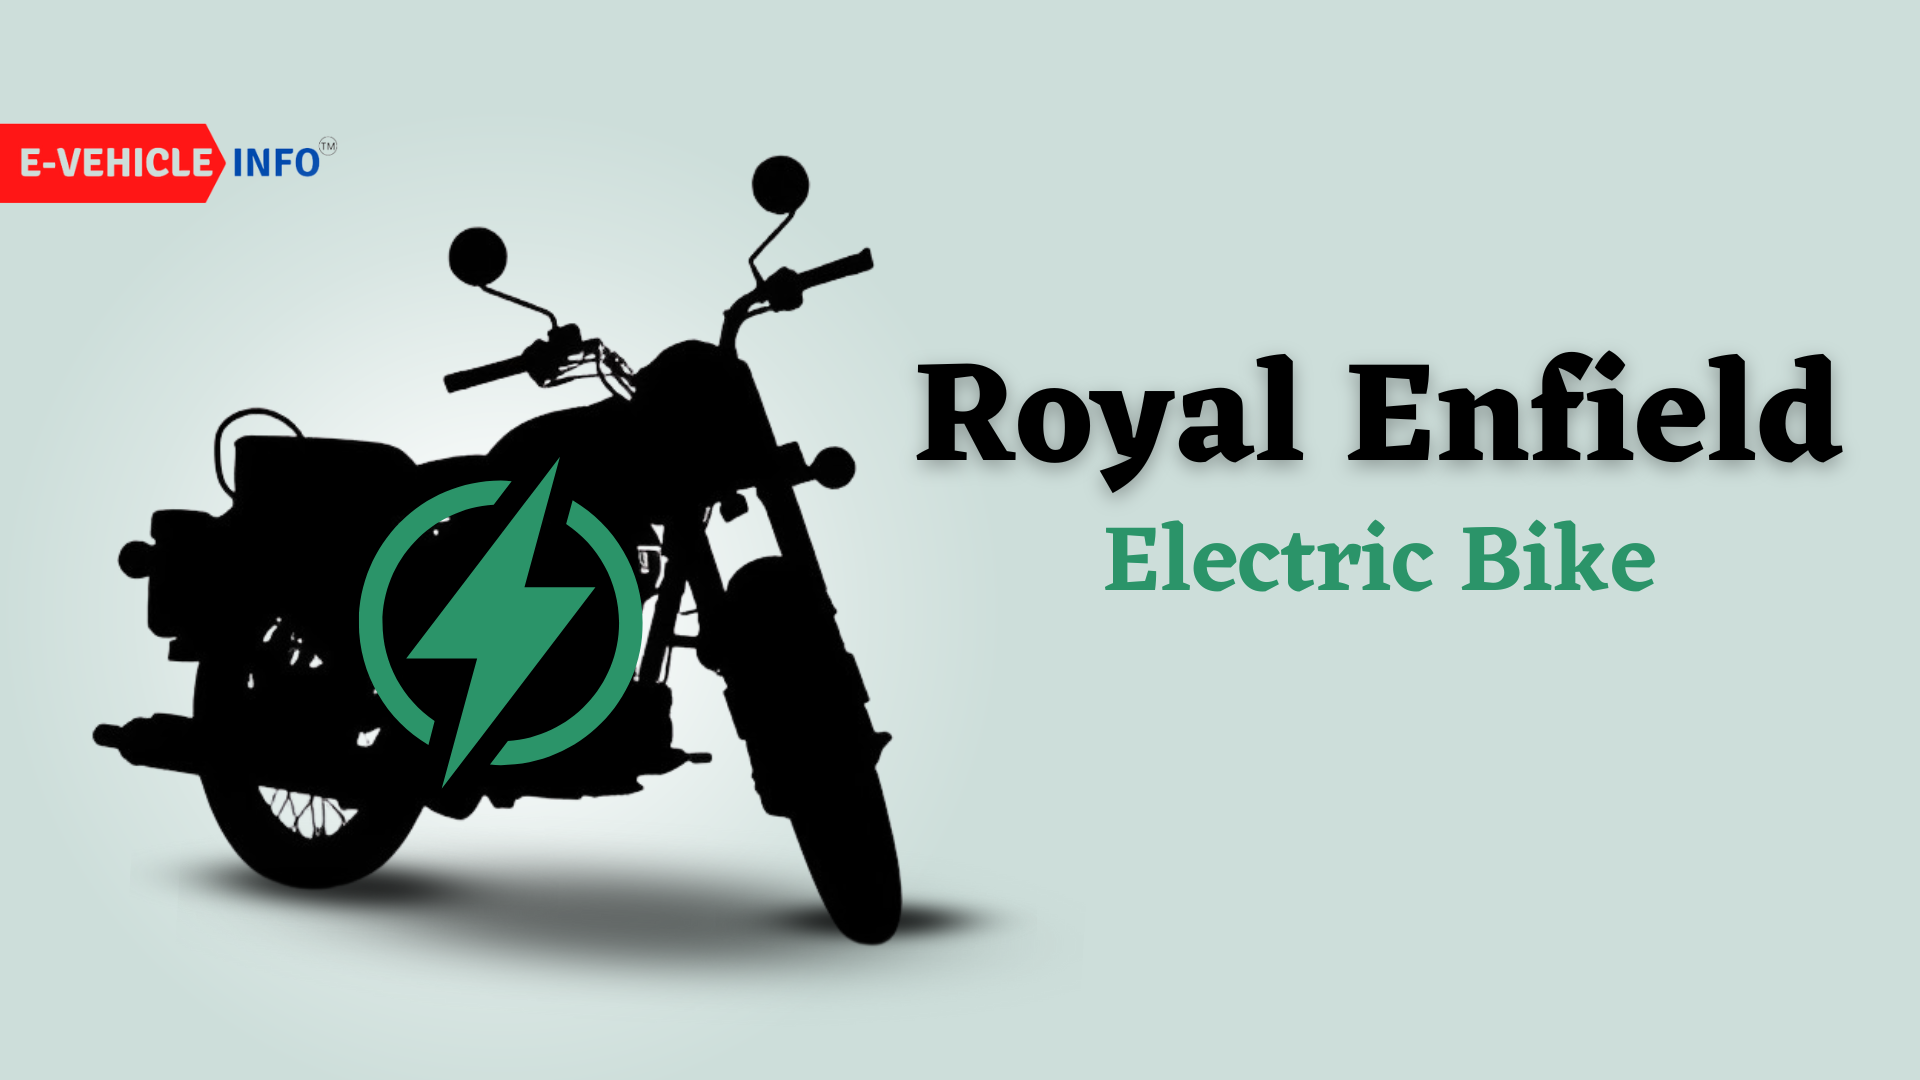 https://e-vehicleinfo.com/top-upcoming-electric-motorcycles-under-2-lakhs-in-india/